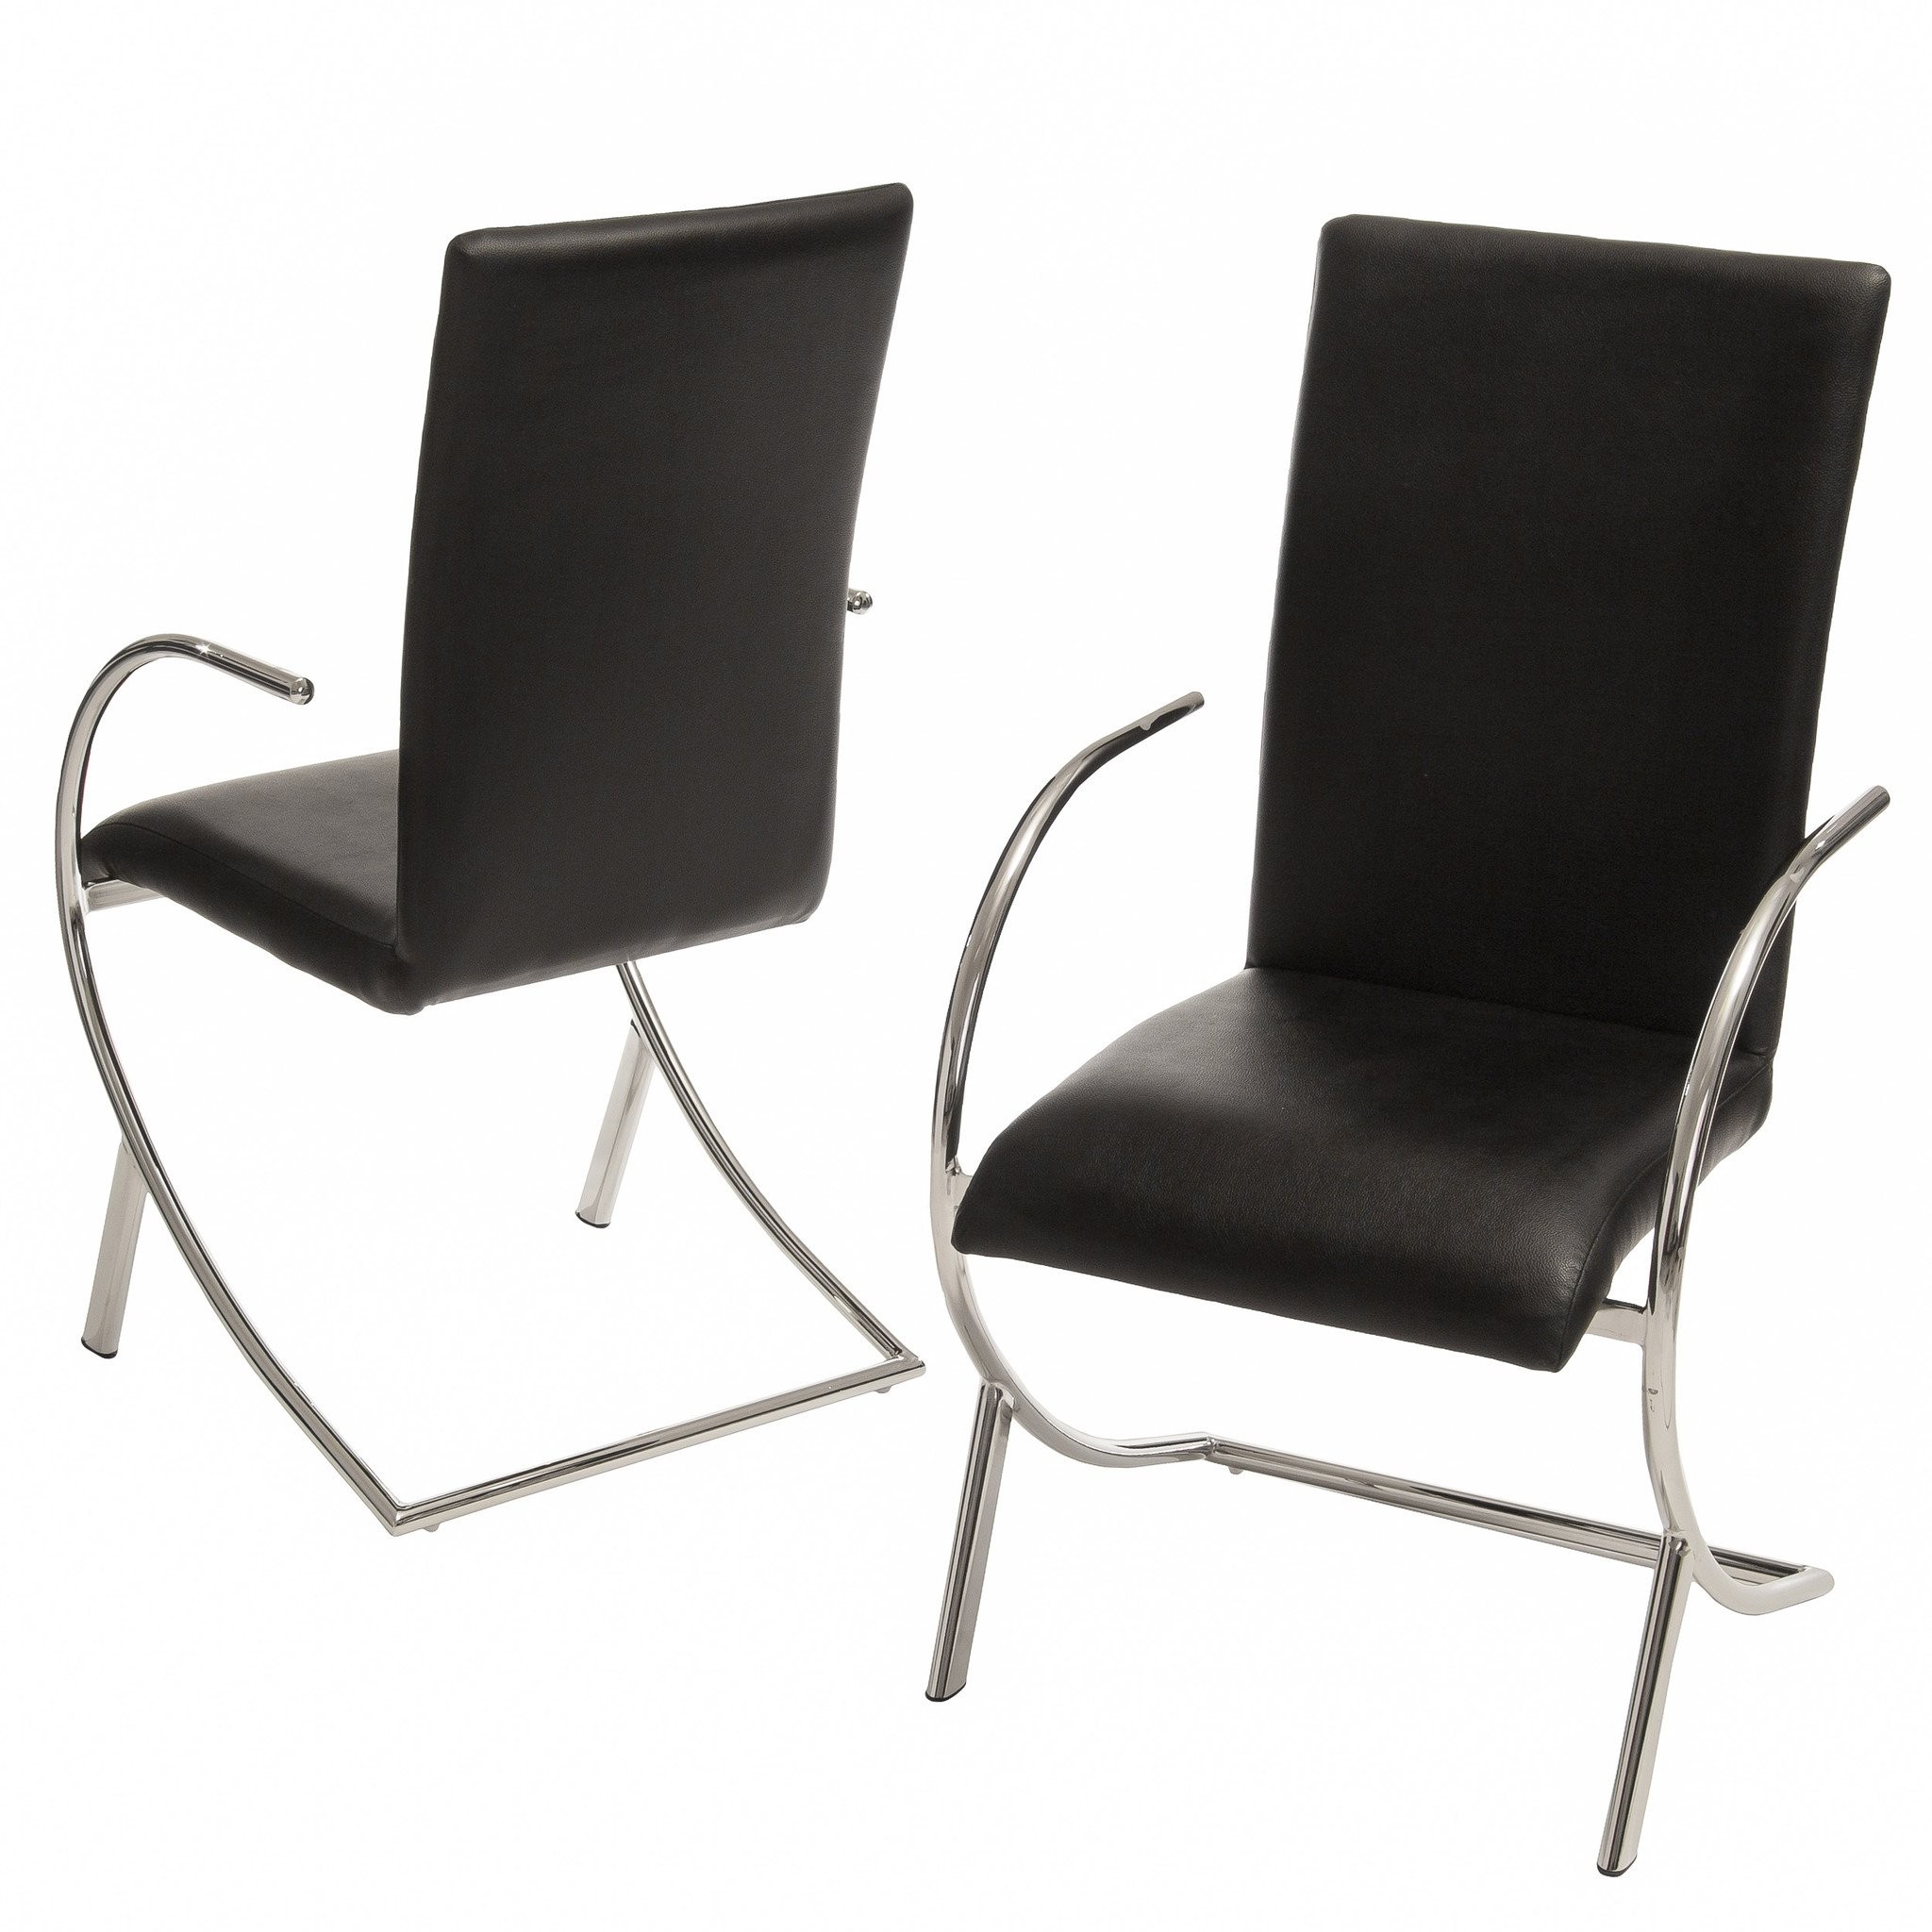 Rockville Black Leather Chairs (Set of 2)